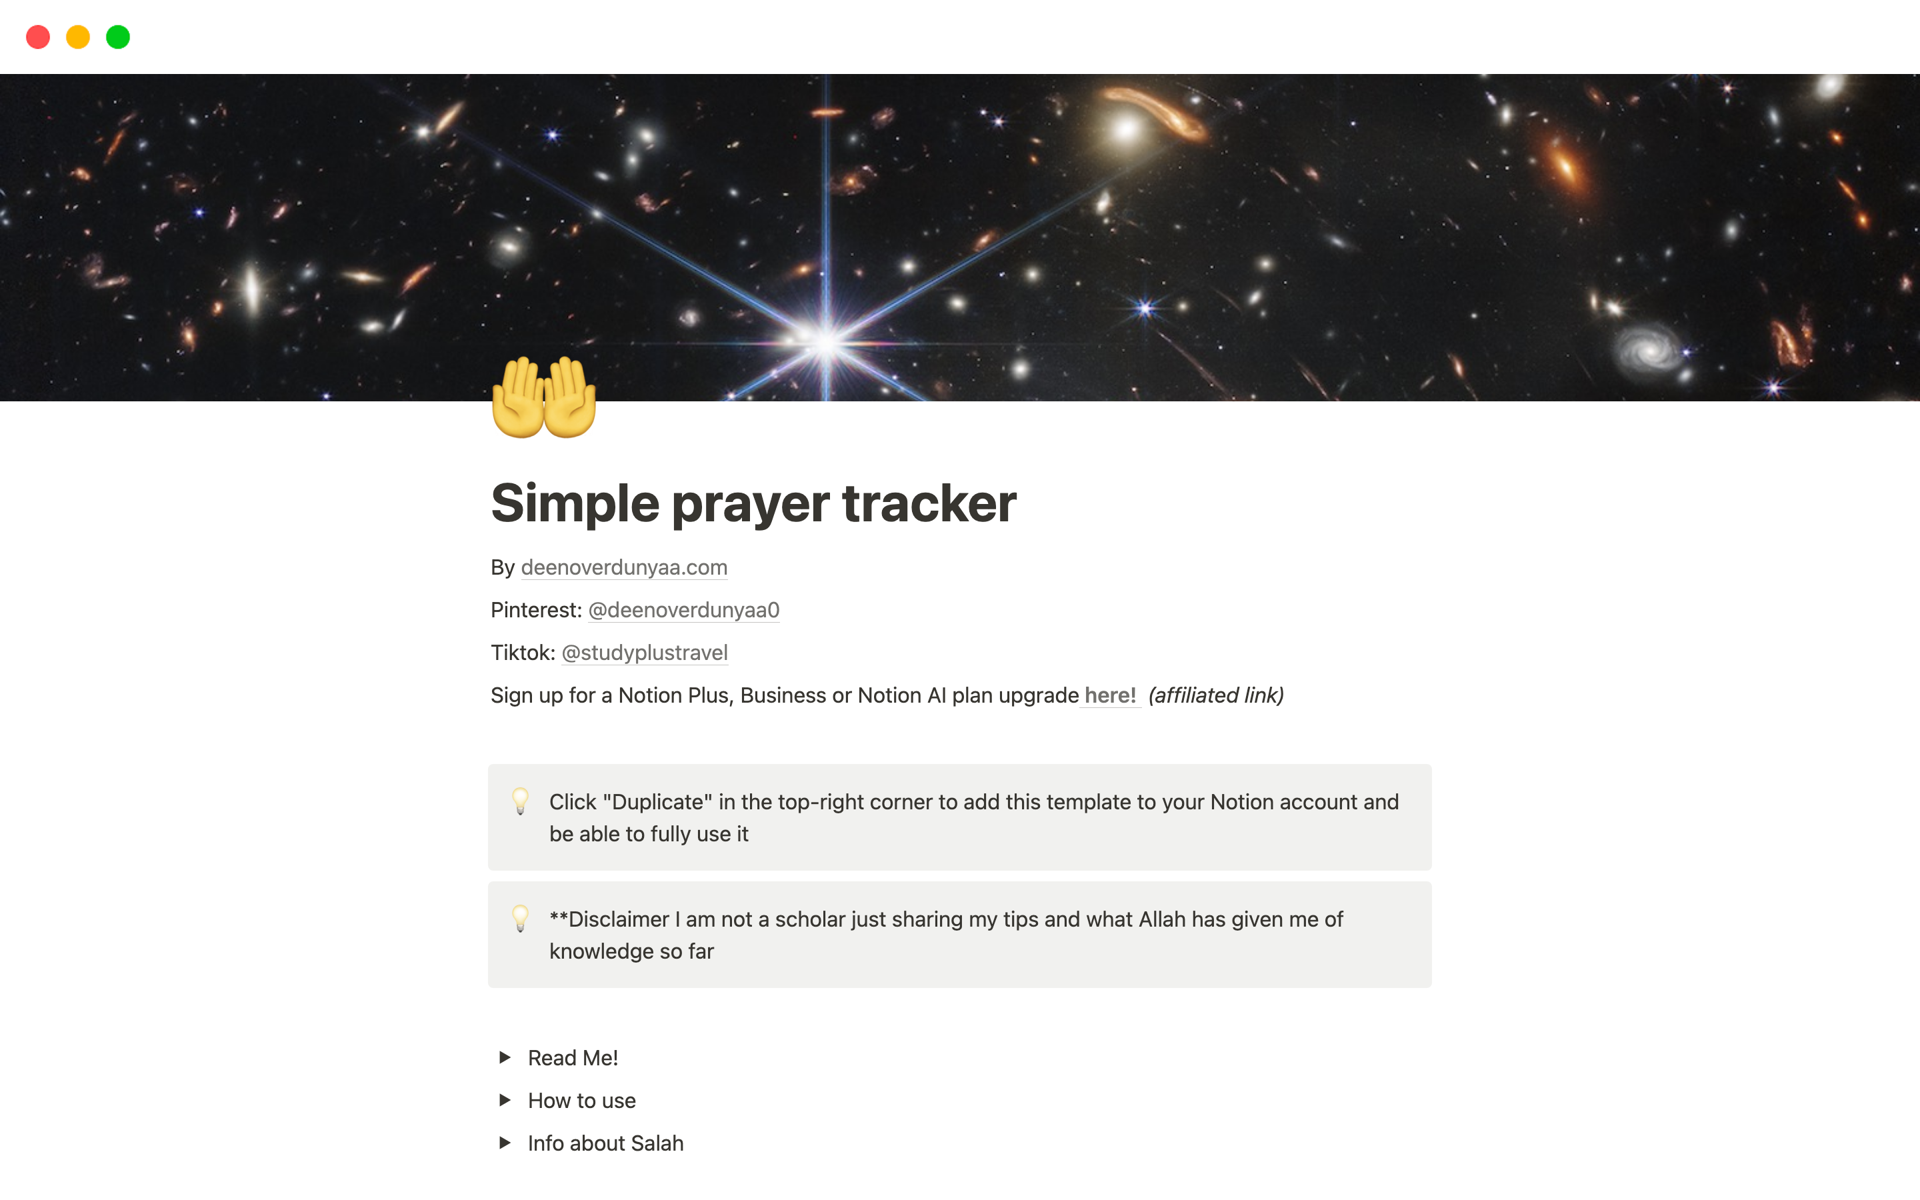 This is a simple prayer tracker to stay on track with your prayers!